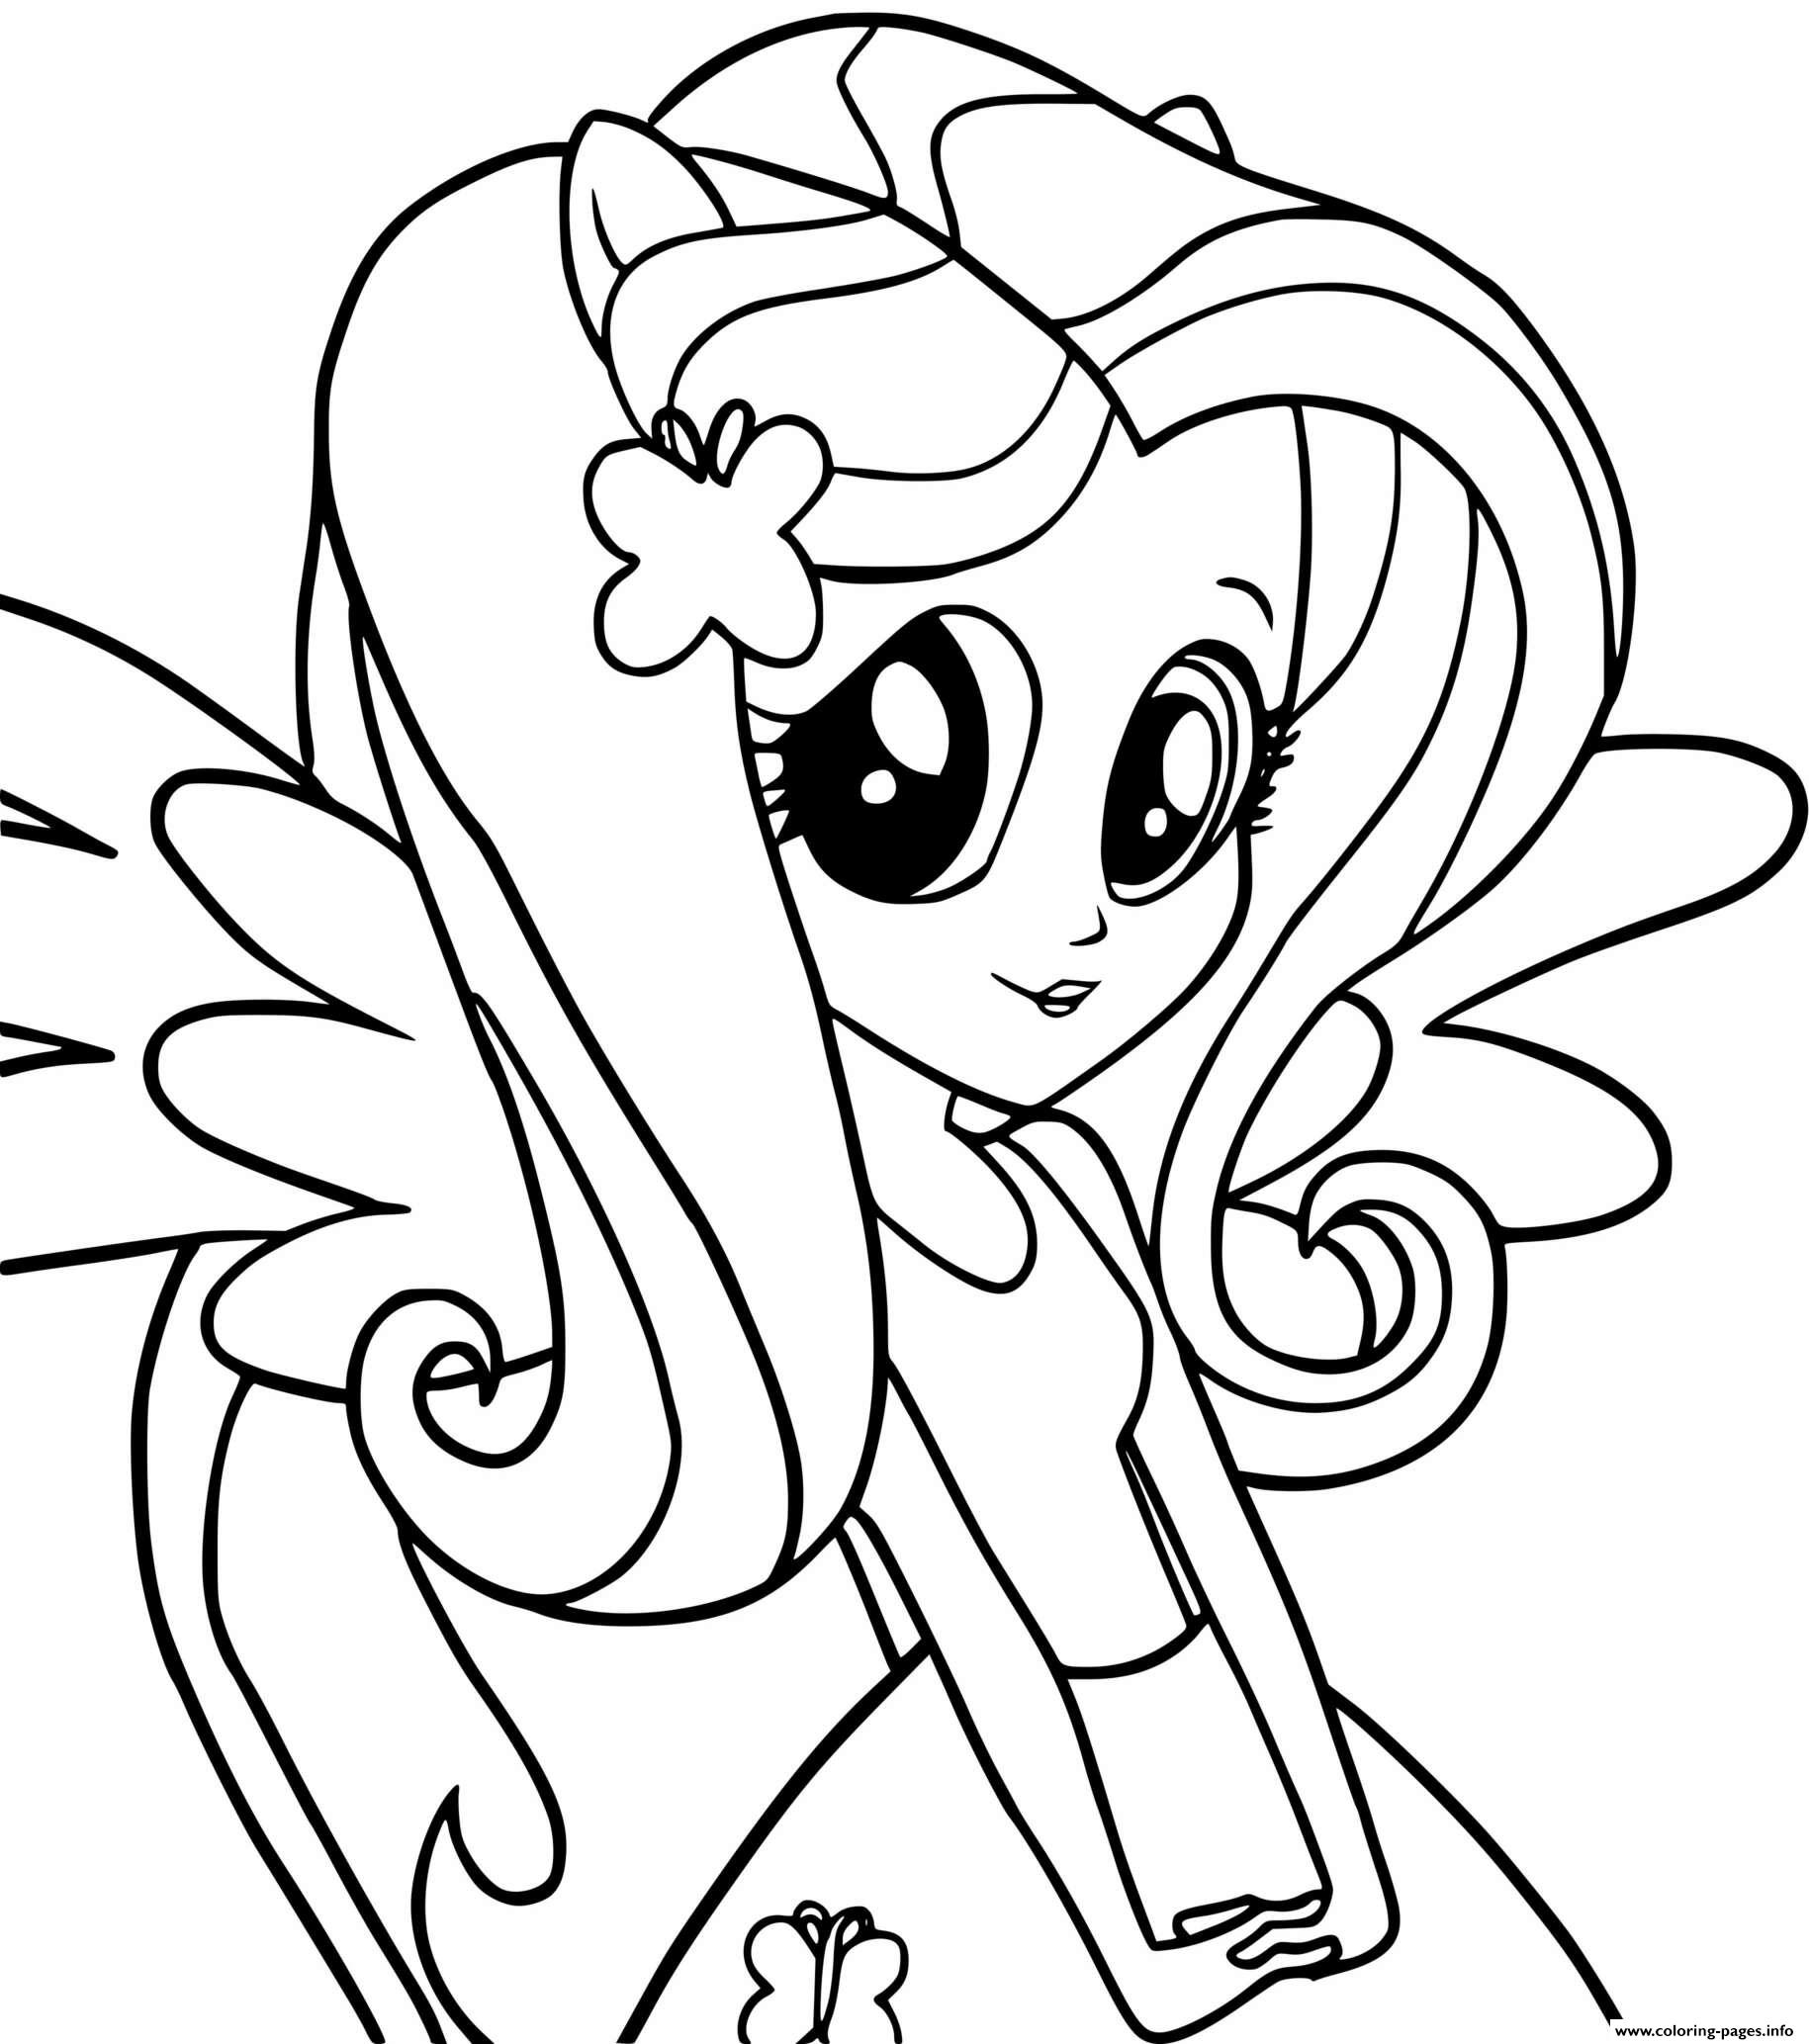 My Pony Equestria Fluttershy Coloring Pages 28 Images 15 Printable My Pony Equestria Coloring Pages Fluttershy Printable Coloring Pages Coloring Home My Pony Equestria Coloring Pages Fluttershy Equestria Coloring Pages